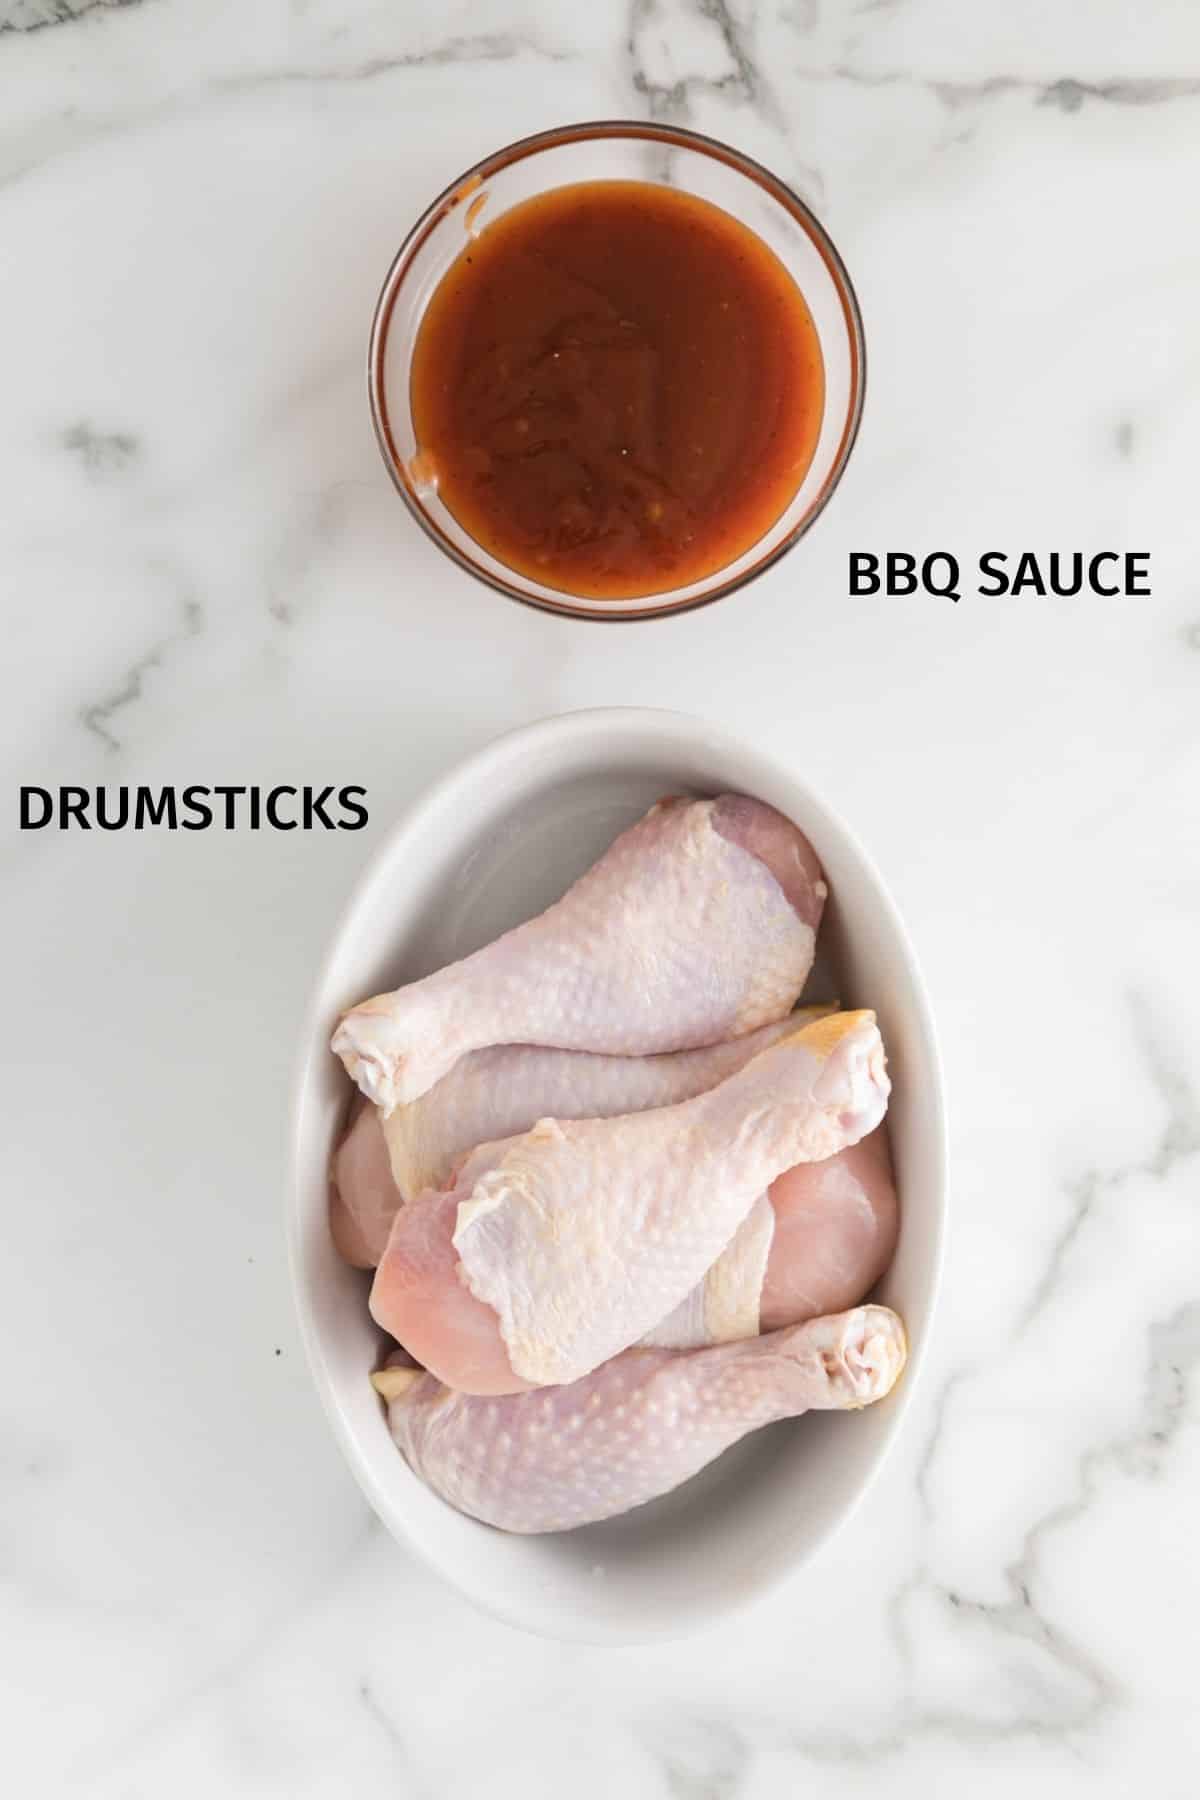 Chicken drumsticks and BBQ sauce in bowls on a white surface.